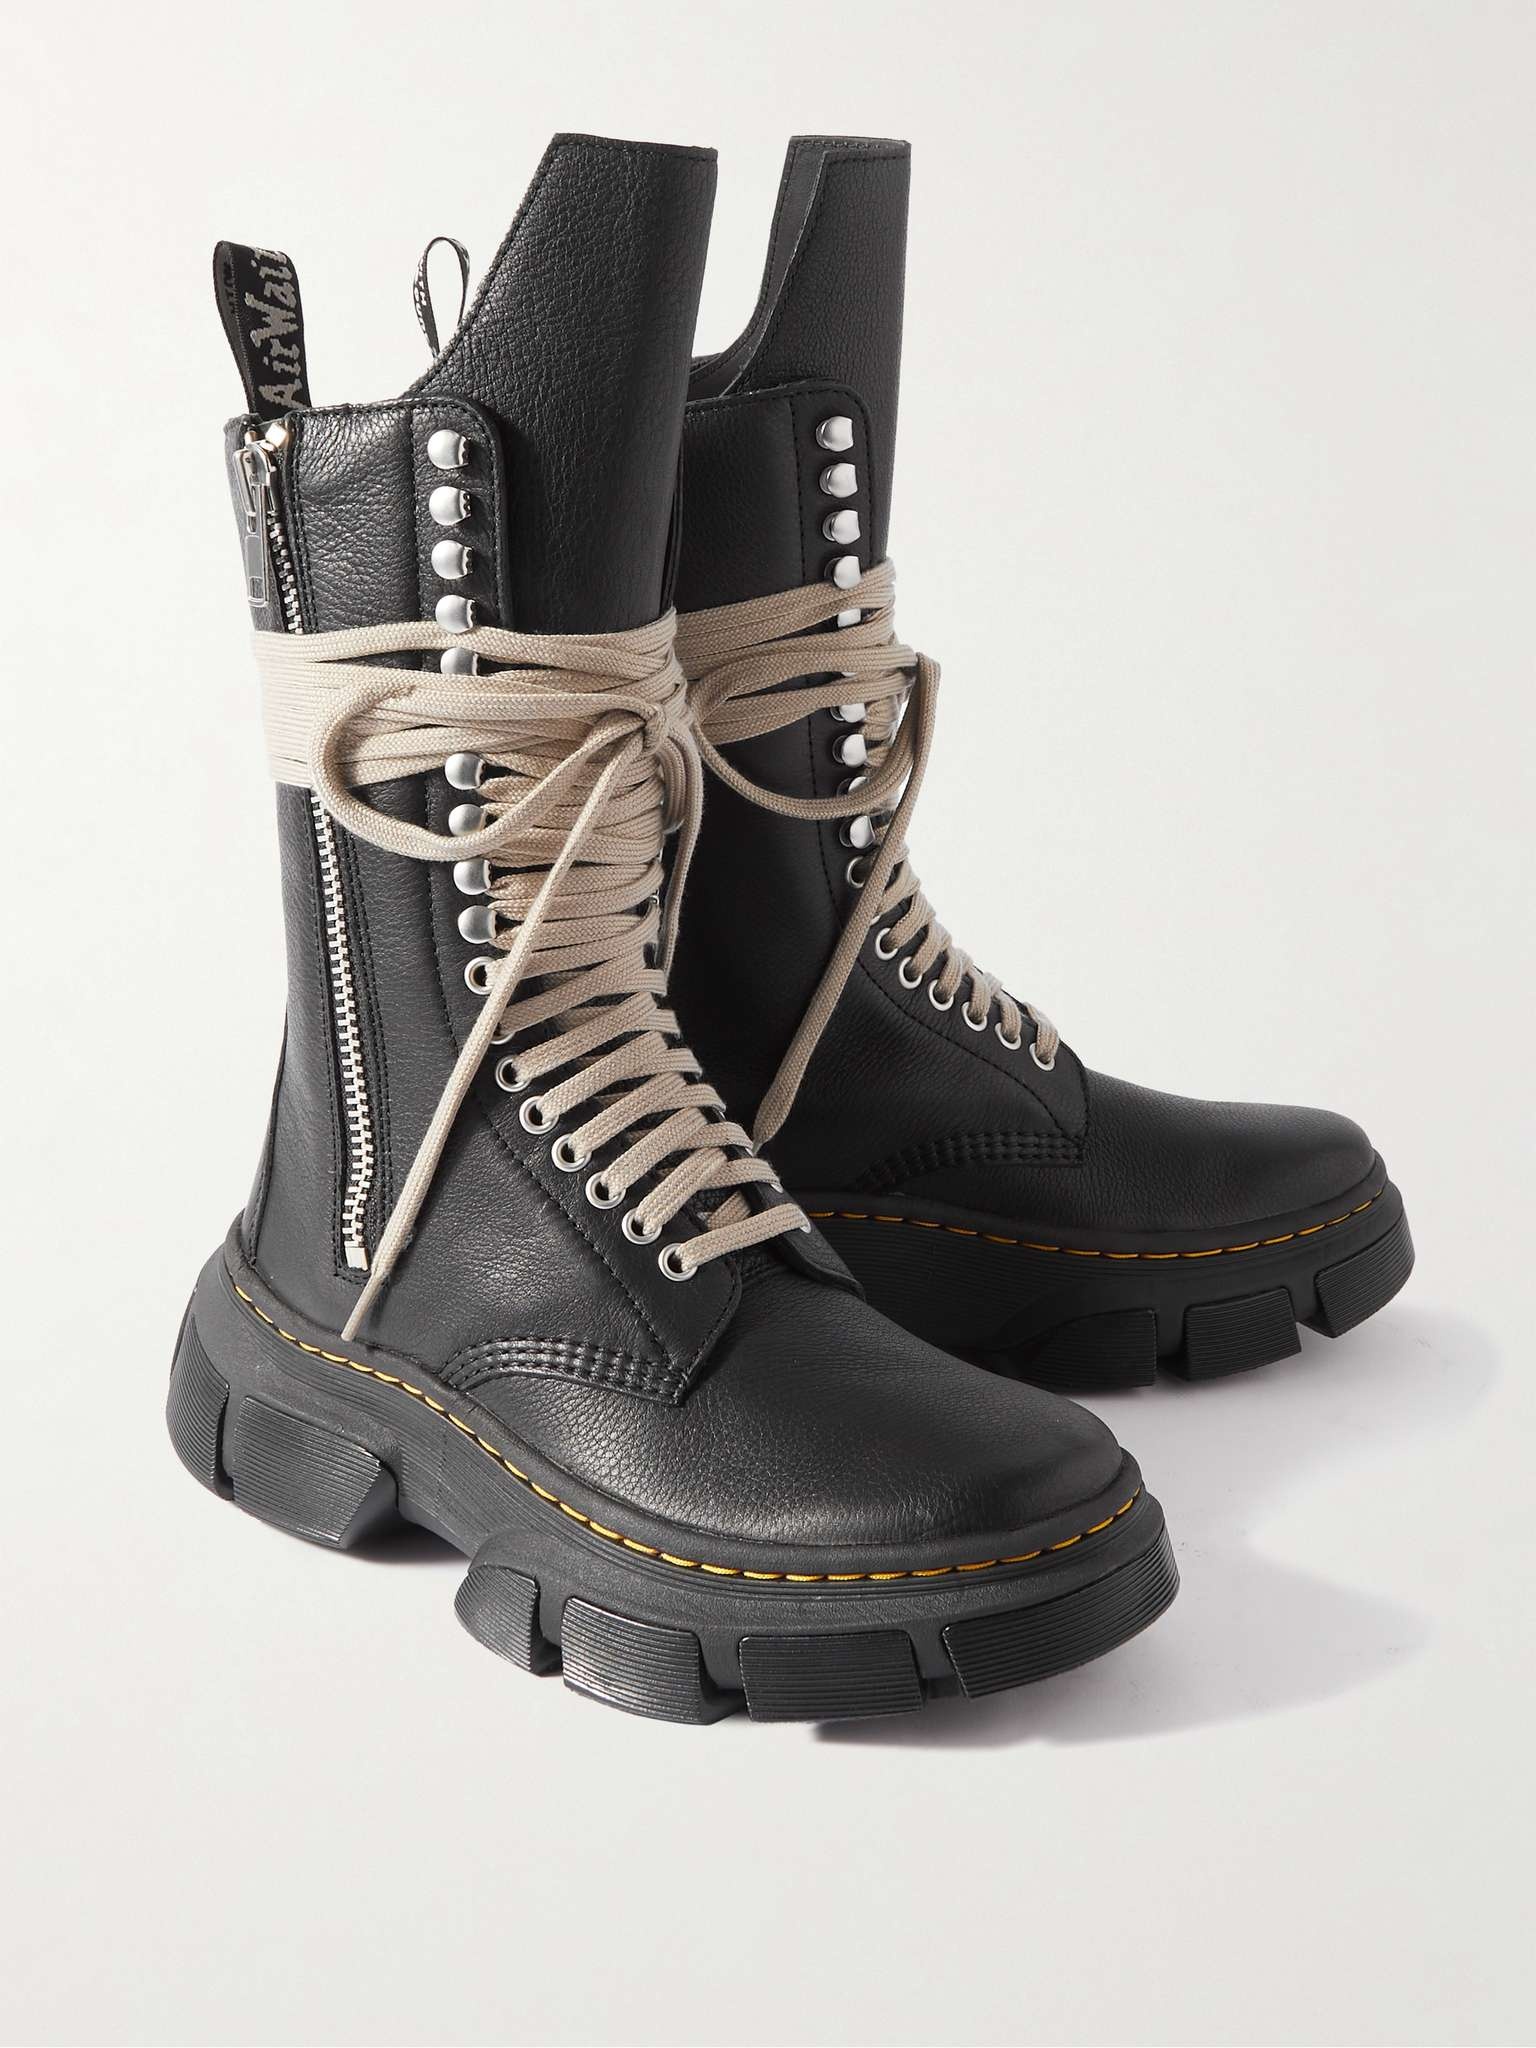 + Dr. Martens 1918 Full-Grain Leather Boots - 4